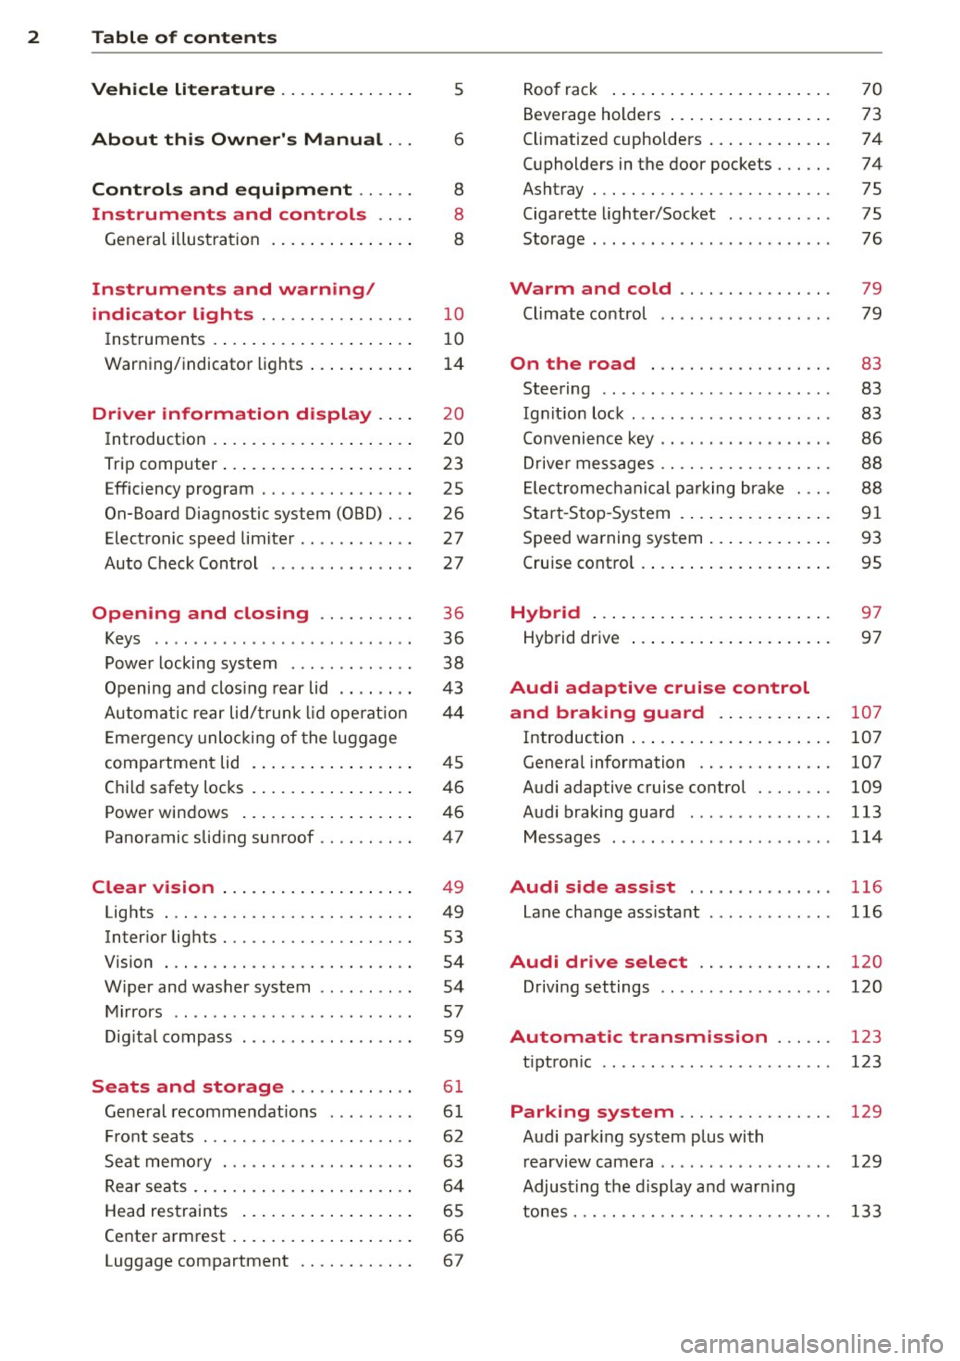 AUDI Q5 2013  Owners Manual 2  Table  of  contents Vehicle  literature  .. .. .. .. .. ... . 
About  this  Owners  Manual  ... 
Controls  and  equipment  .. ...  . 
Ins truments  and  controls  .. . . 
General  illus tration  .